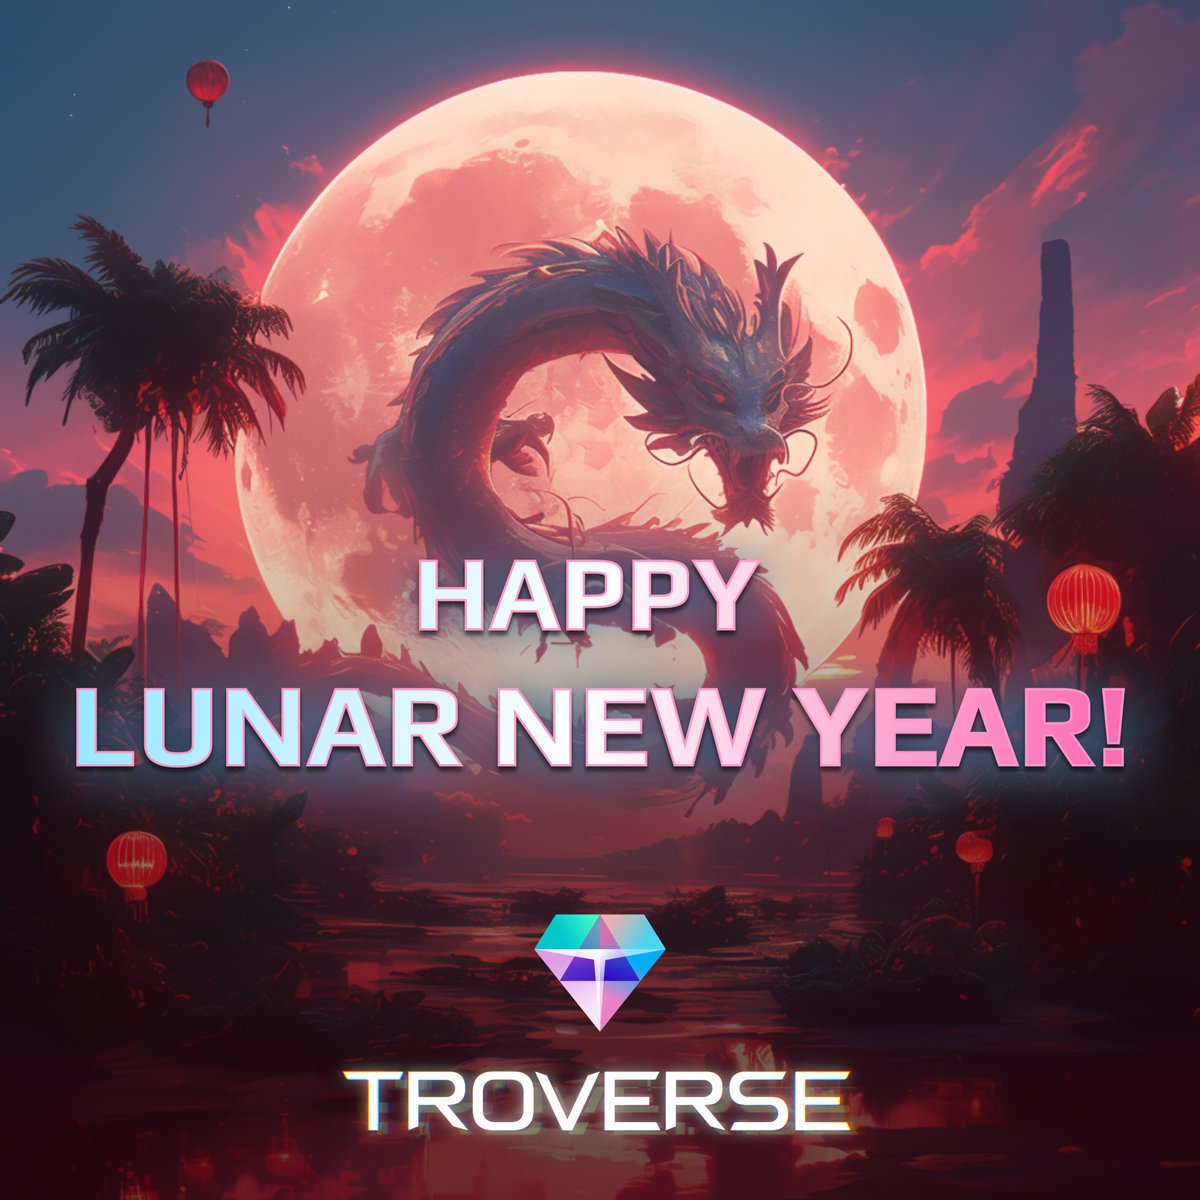 Happy #LunarNewYear, Tromies! ✨🧧 Embark on a year of health, happiness, and cosmic adventure in the #YearOfTheDragon 🐉 May your Troverse journeys be epic! 🚀💎 #Troverse #GameFi #Web3 #Metaverse #NFT